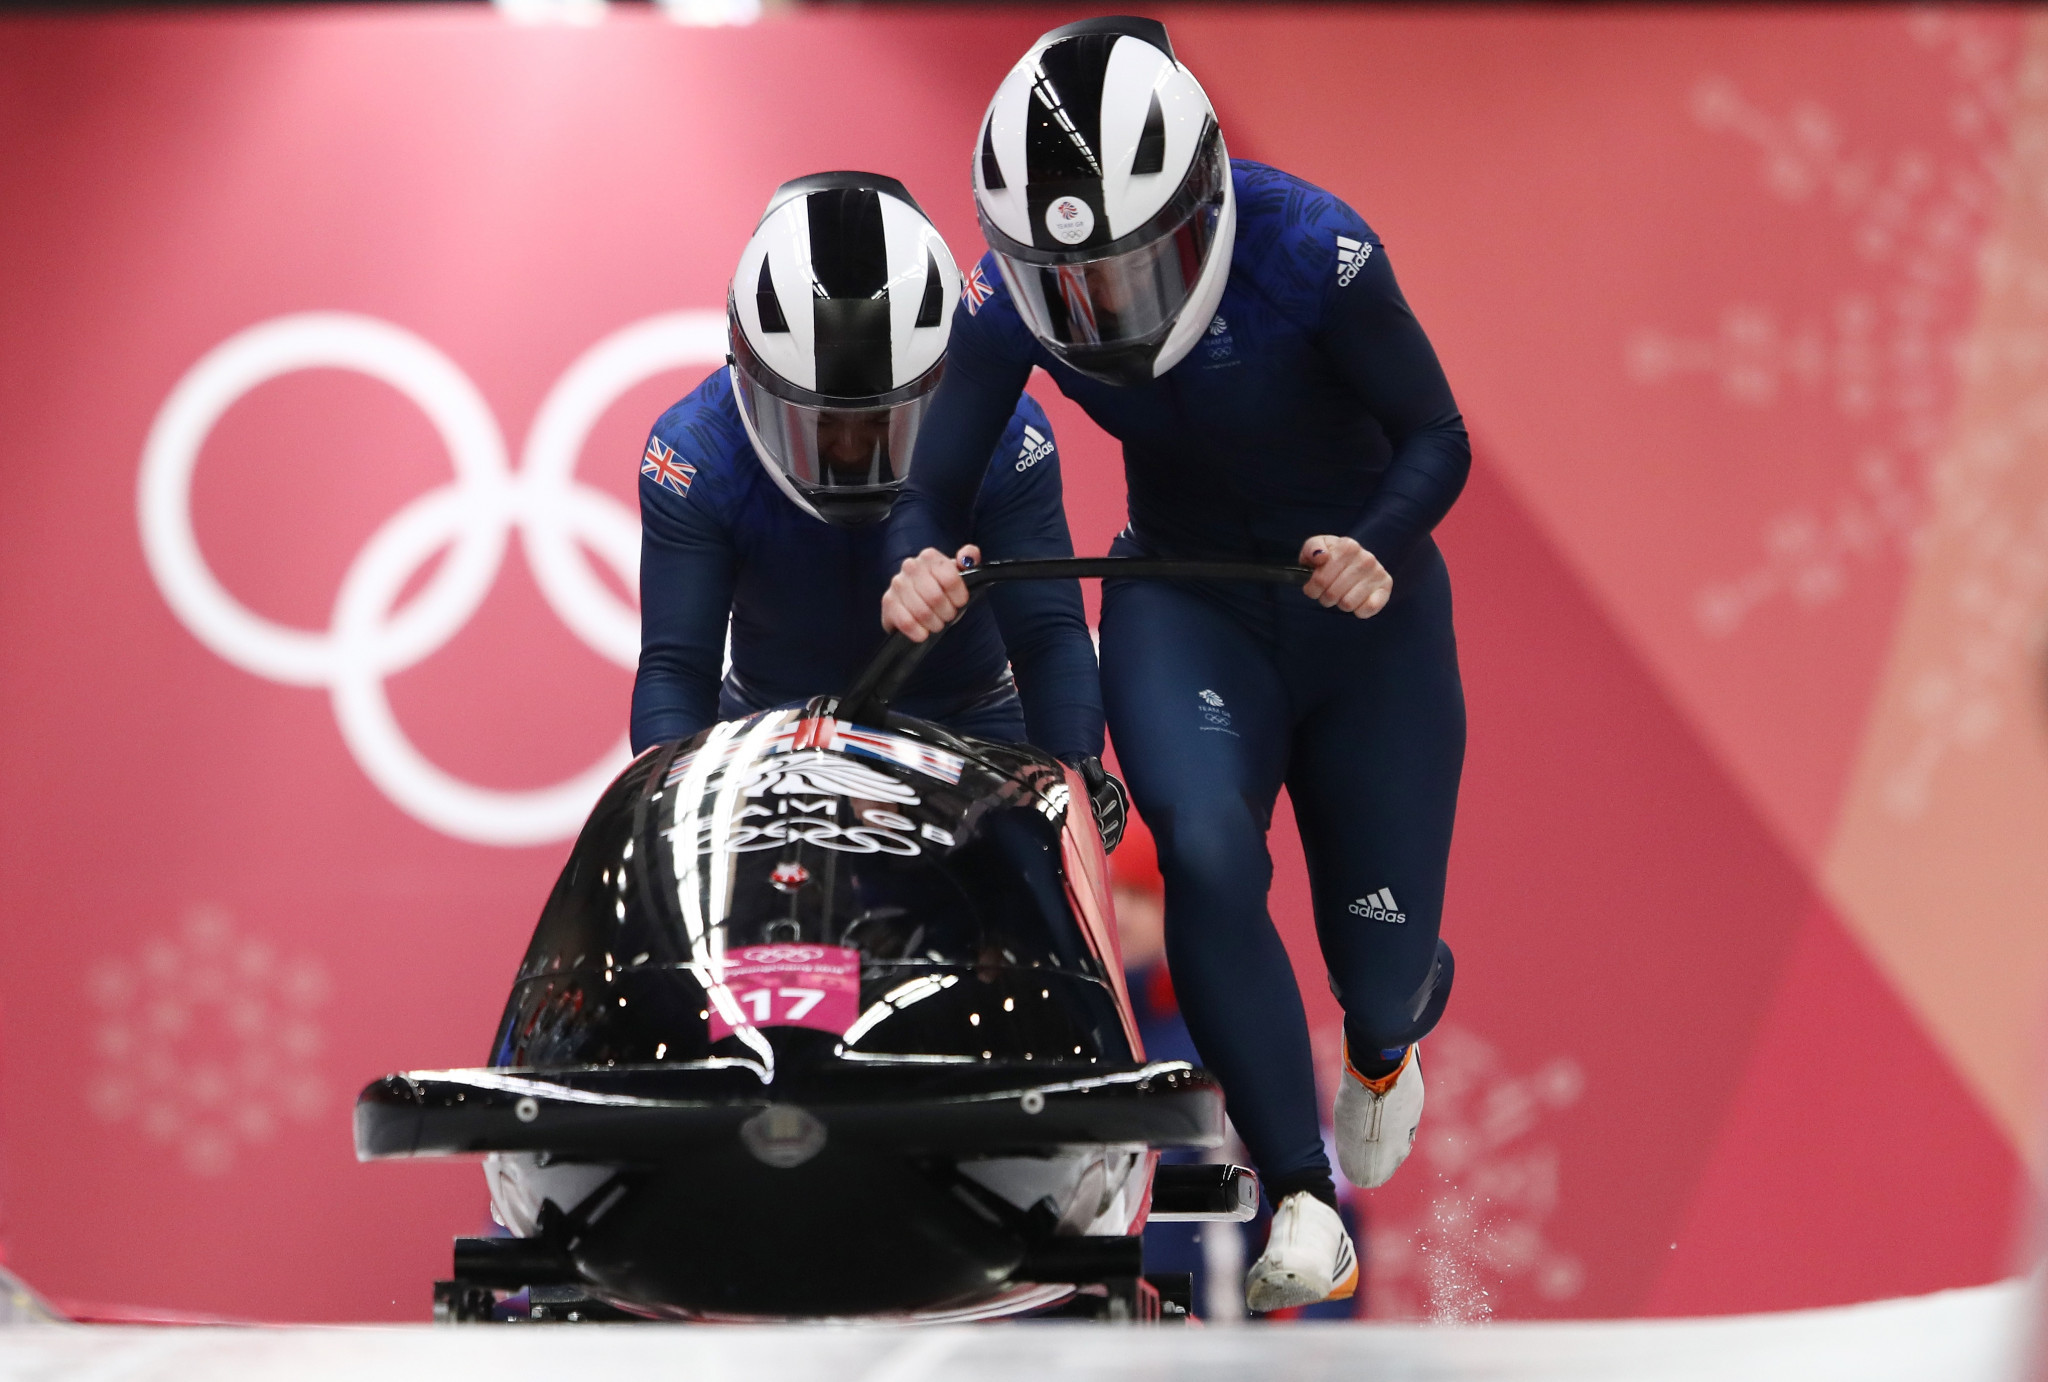 Moore steps away from bobsleigh to focus on studies